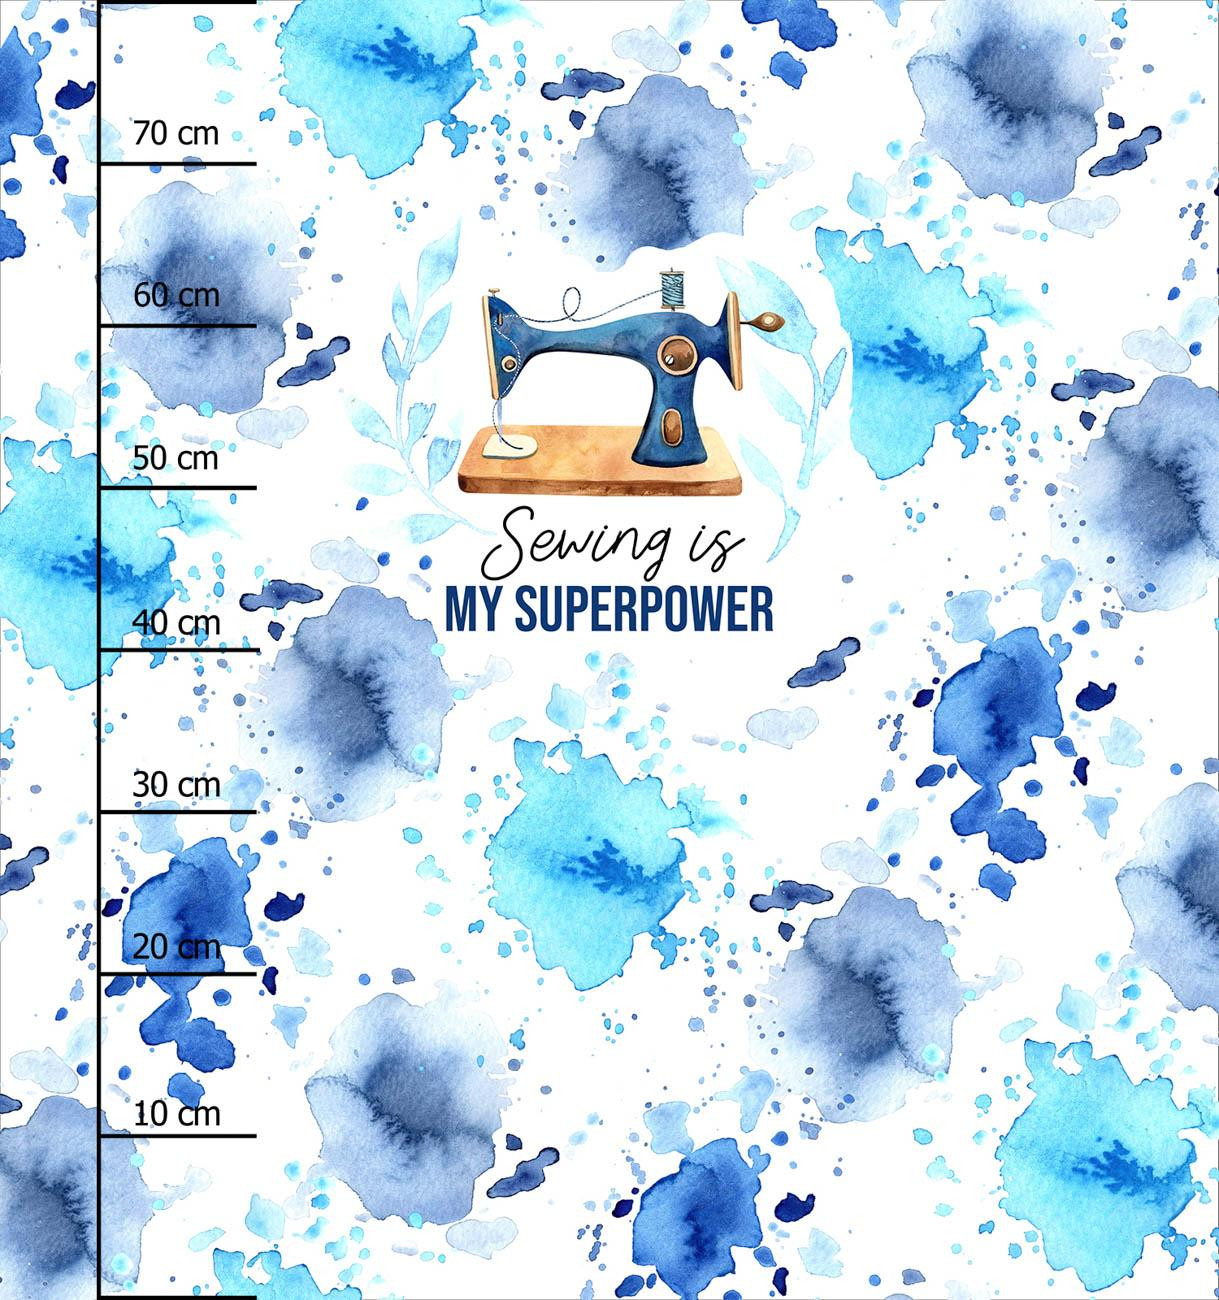 SEWING IS MY SUPERPOWER - Panel (75cm x 80cm), softshell 